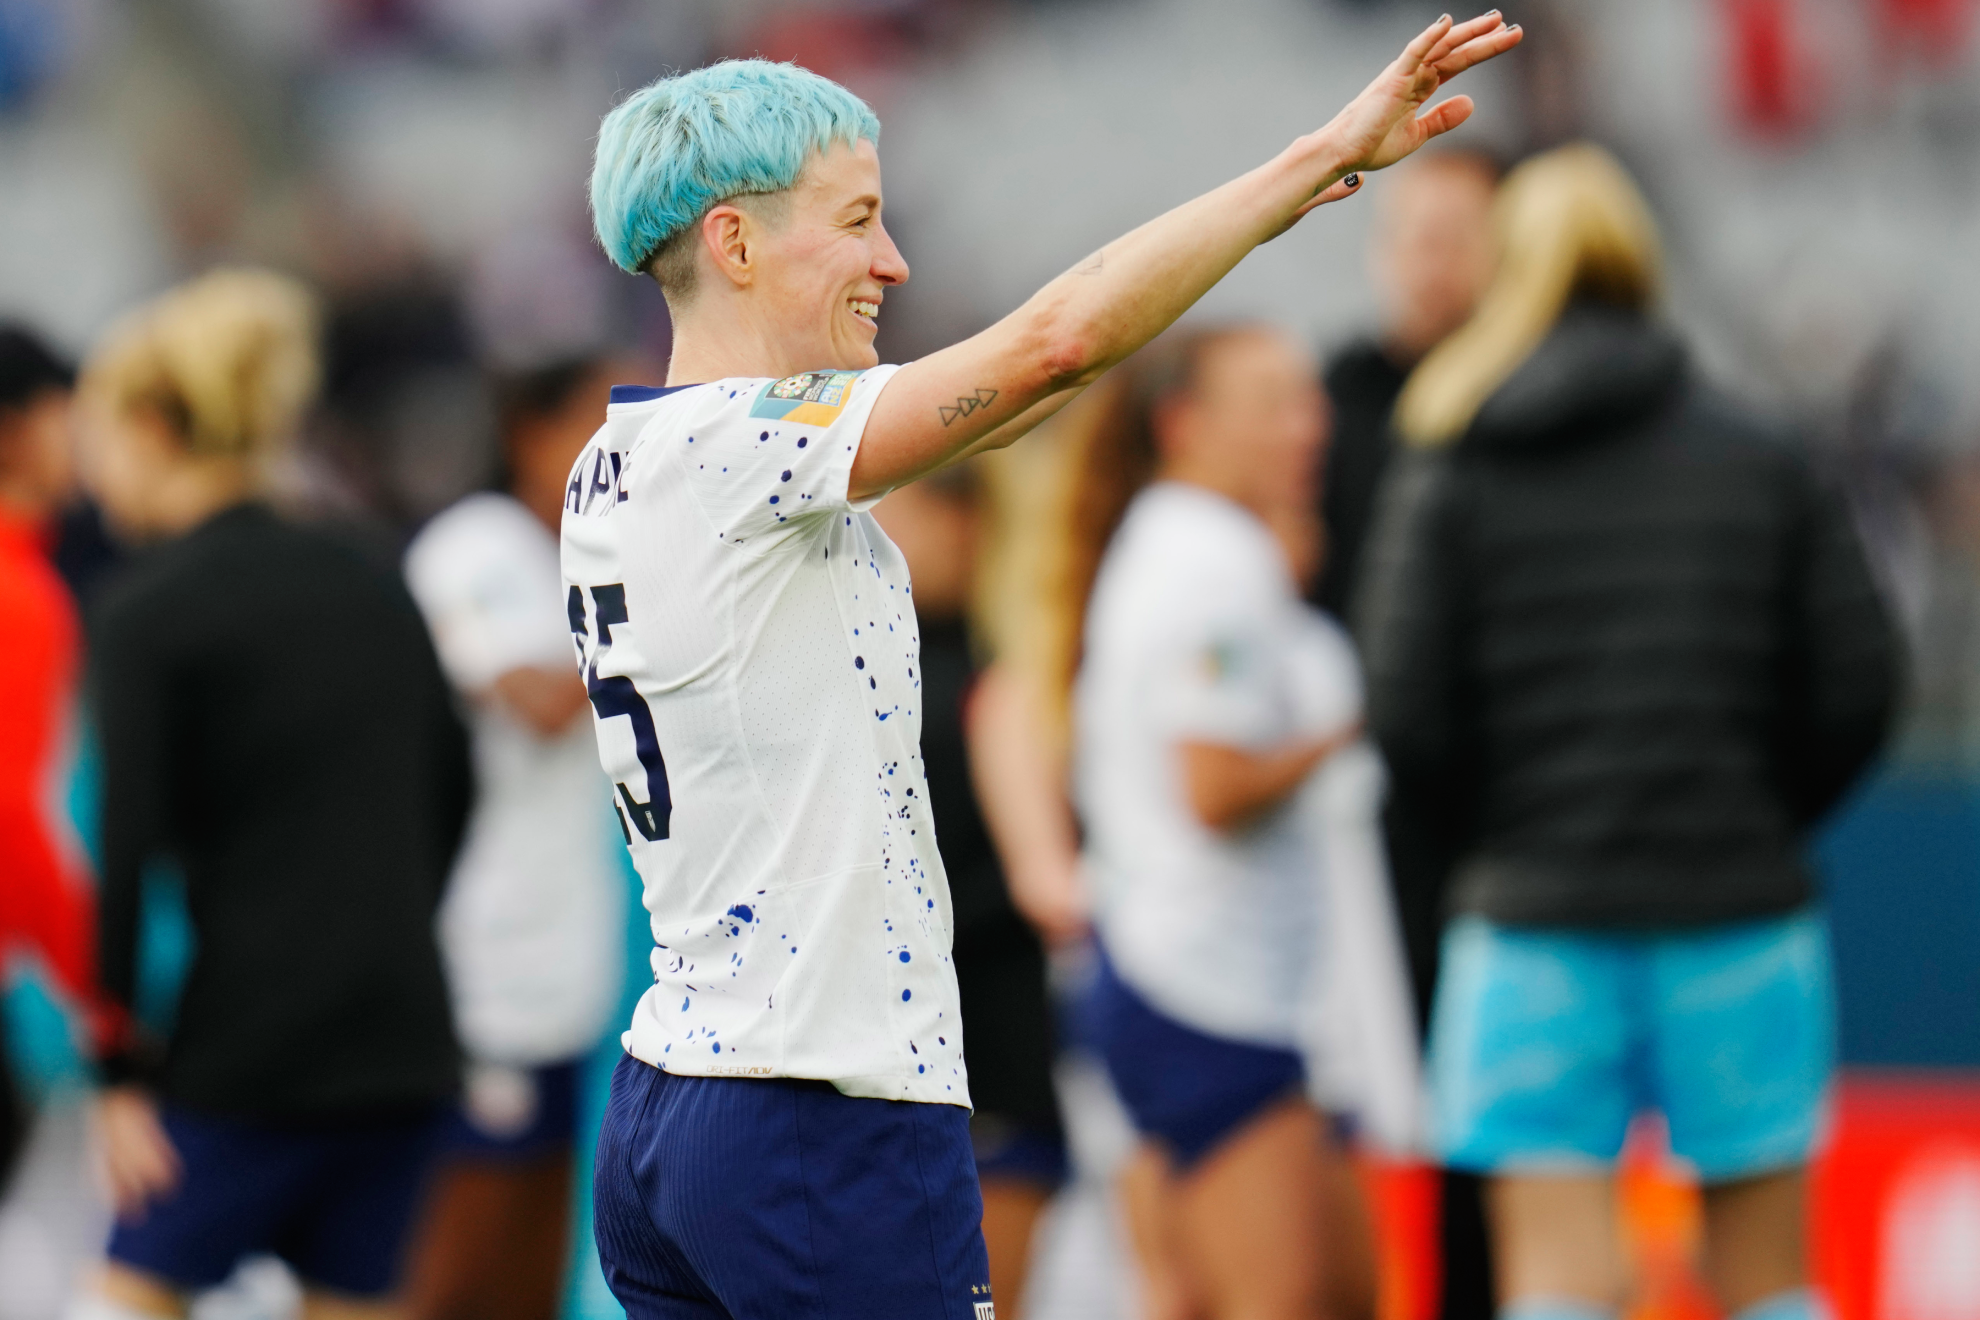 'She's everything': Fans pay tribute to Megan Rapinoe after making her 200th appearance for the USA